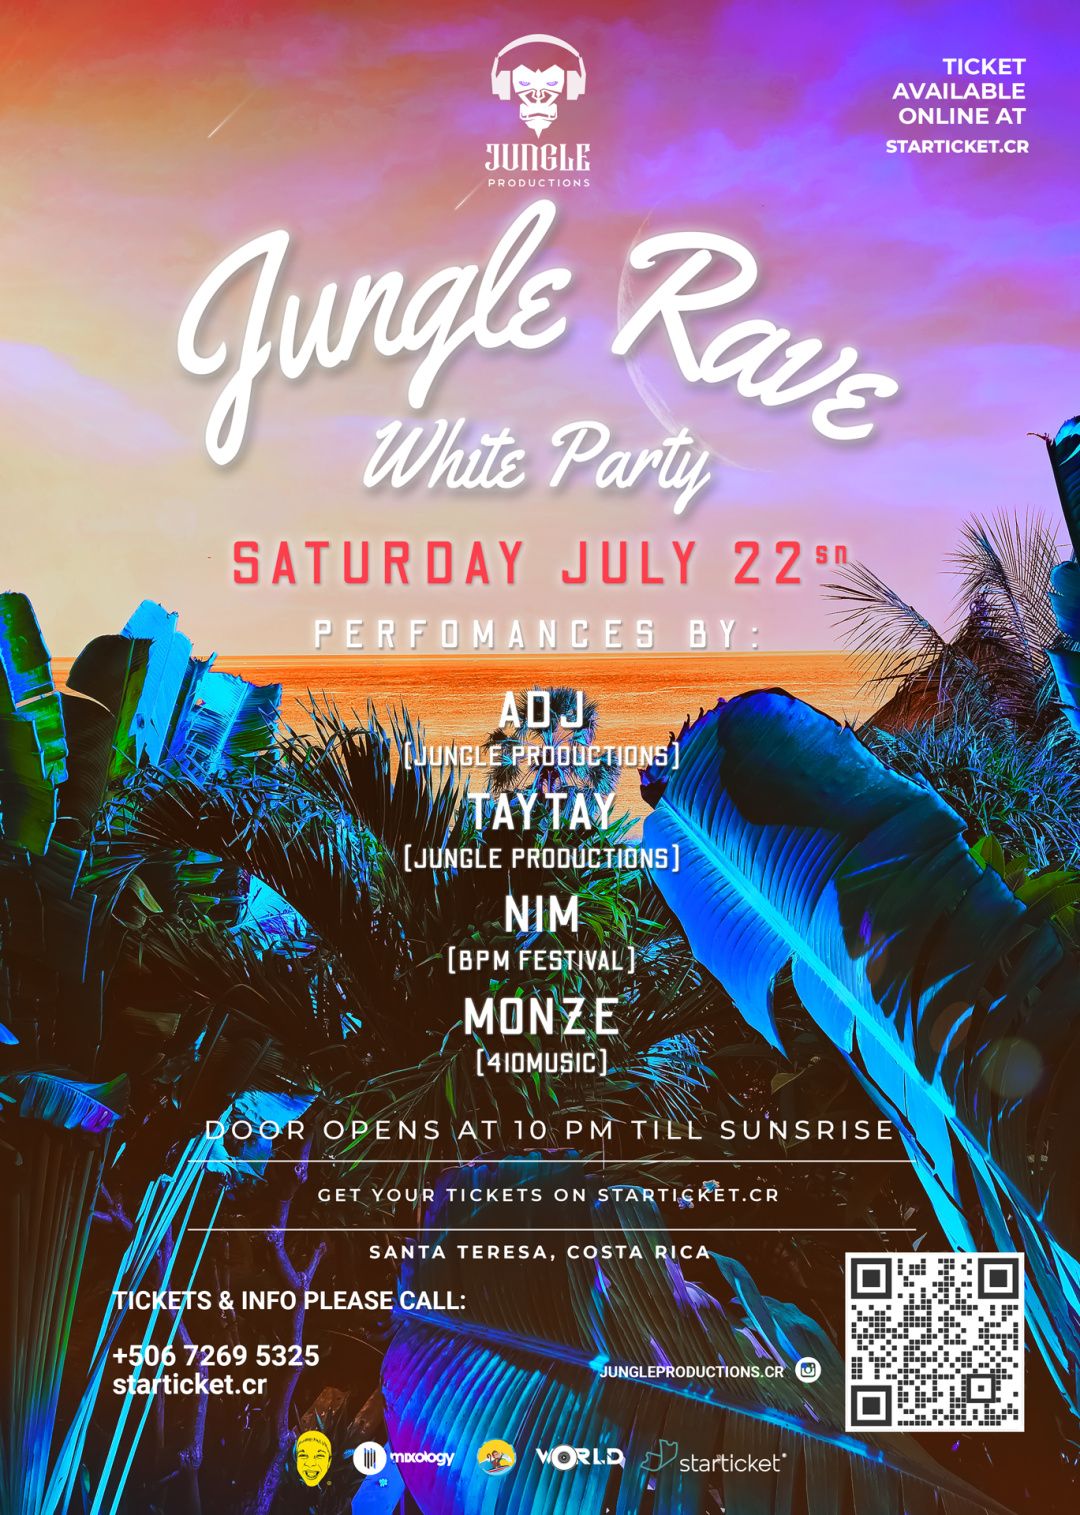 Jungle Rave White Party